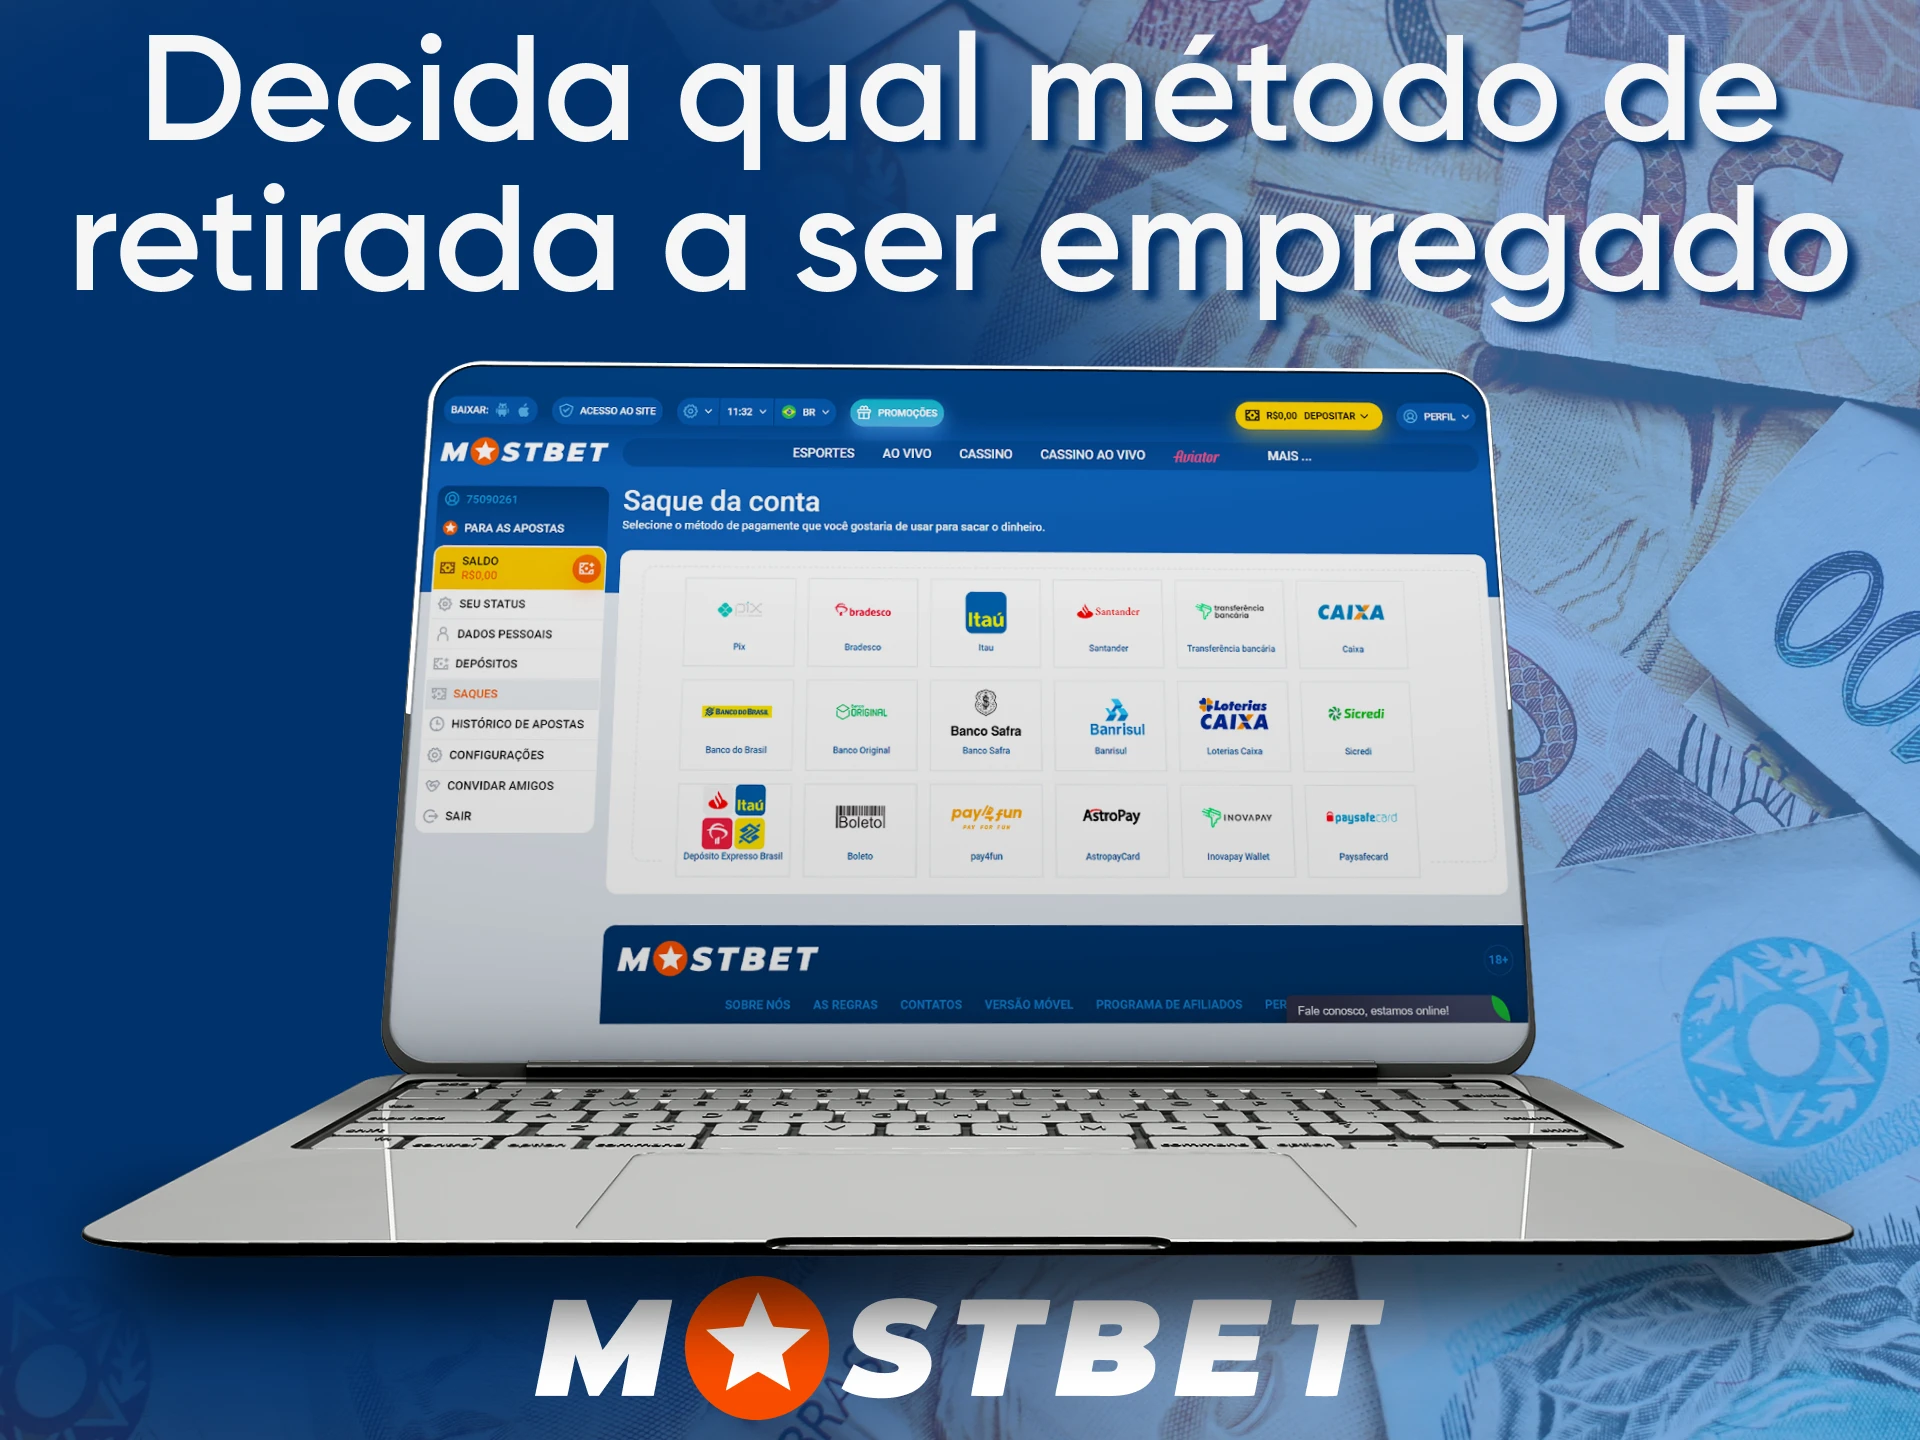 Choose how you want to withdraw money from your Mostbet account.